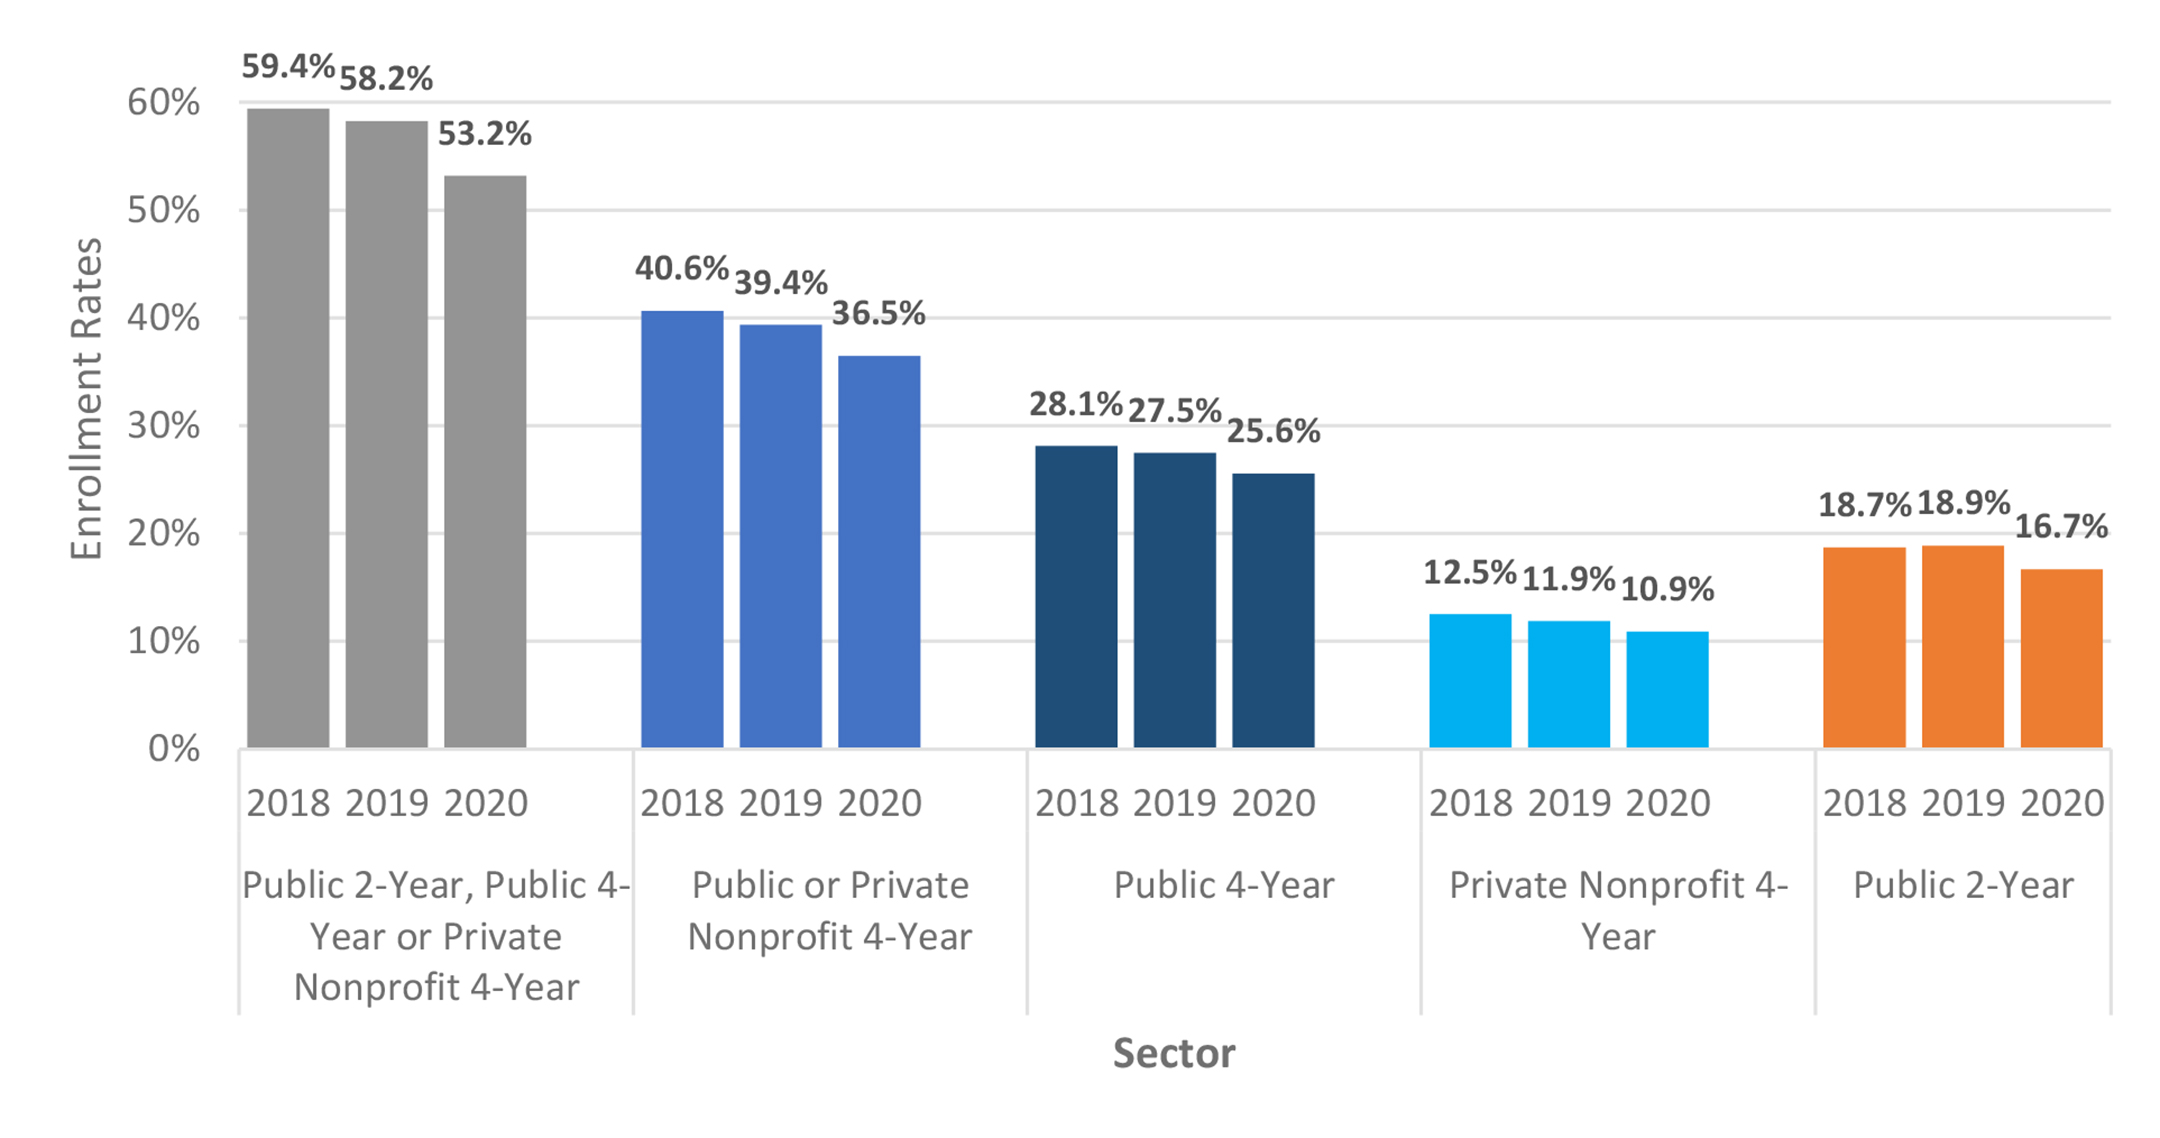 Five bar charts, each with three sets of data from 2018, 2019, and 2020, tracking enrollment rates bye sector: Public 2-year, Public 4-year, or Private Nonprofit 4-year; Public or Private Nonprofit 4-year; Public 4-year; Private Nonprofit 4-year; and Public 2-year